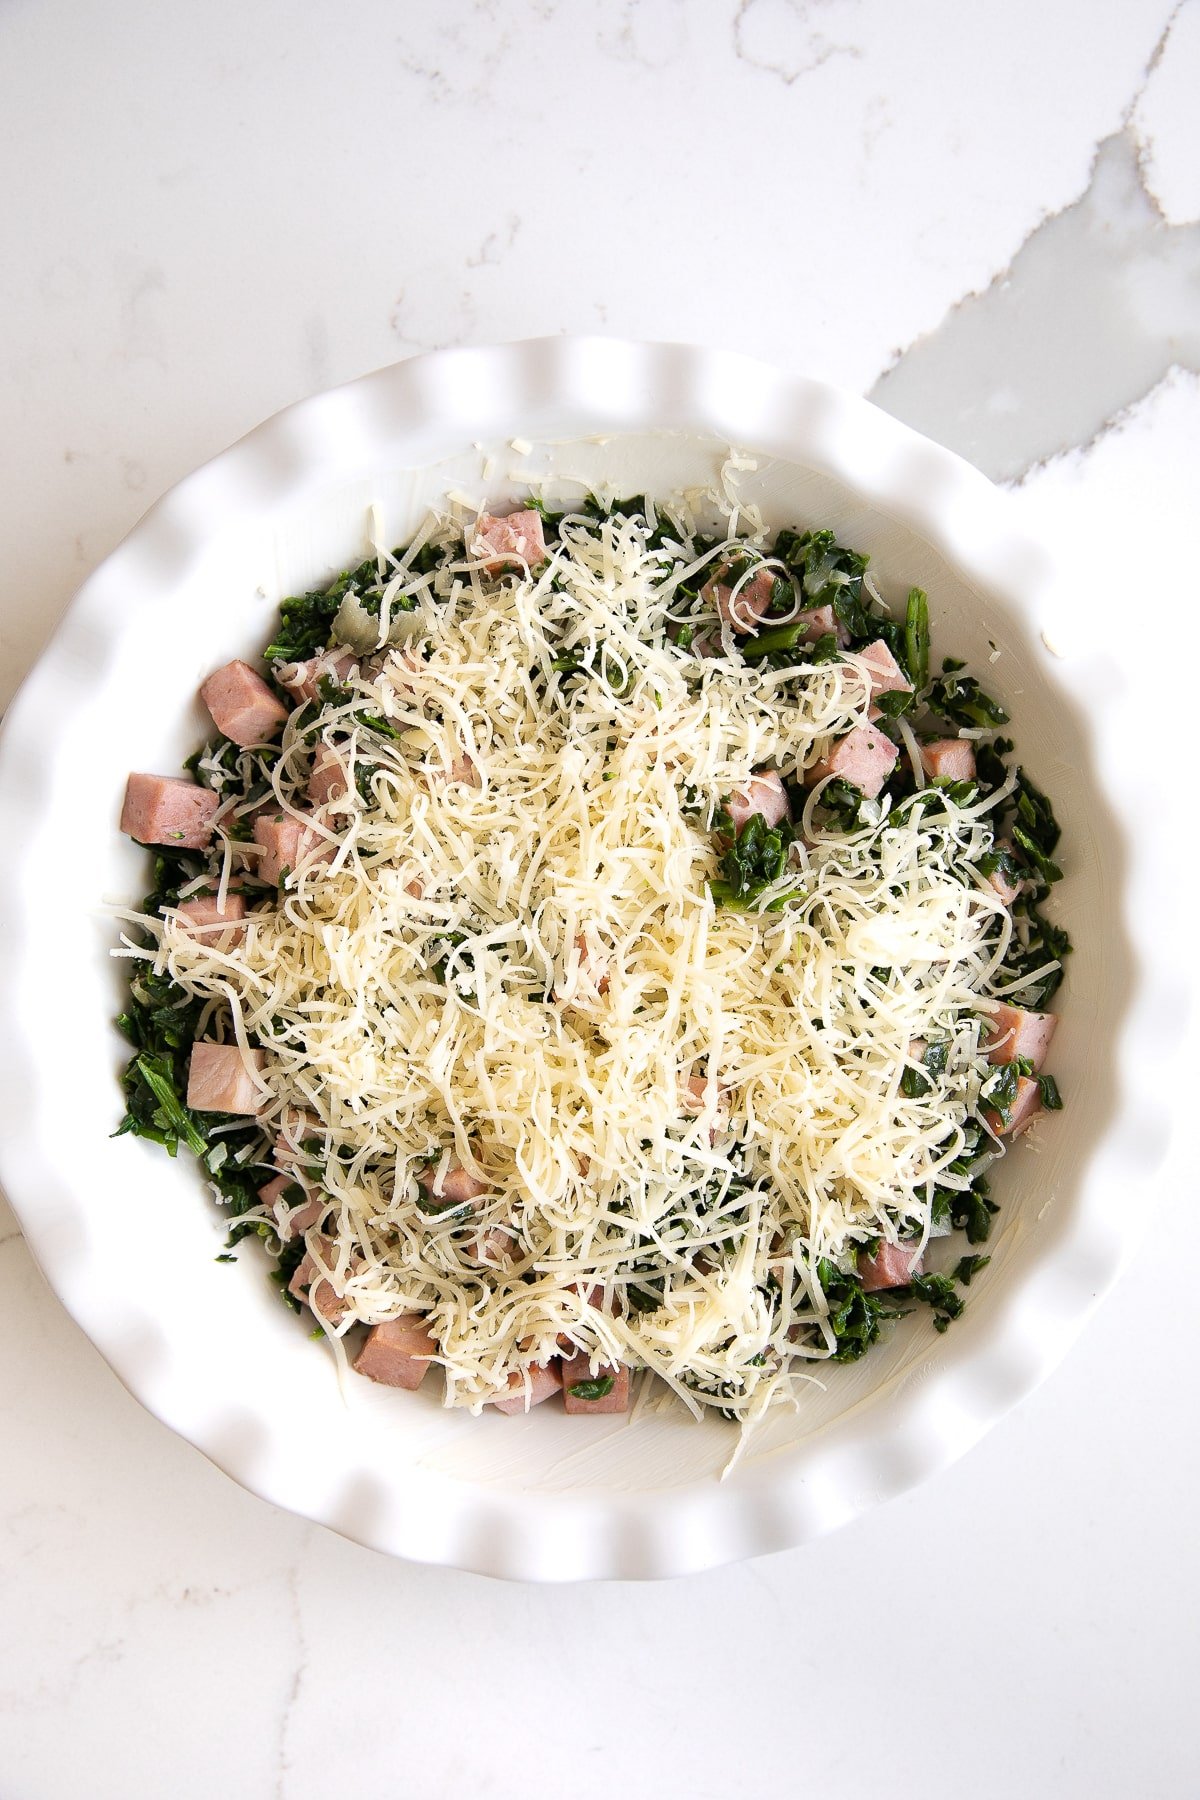 White pie pan filled with cooked spinach, shallots, cubes of smoked ham, and shredded cheese.